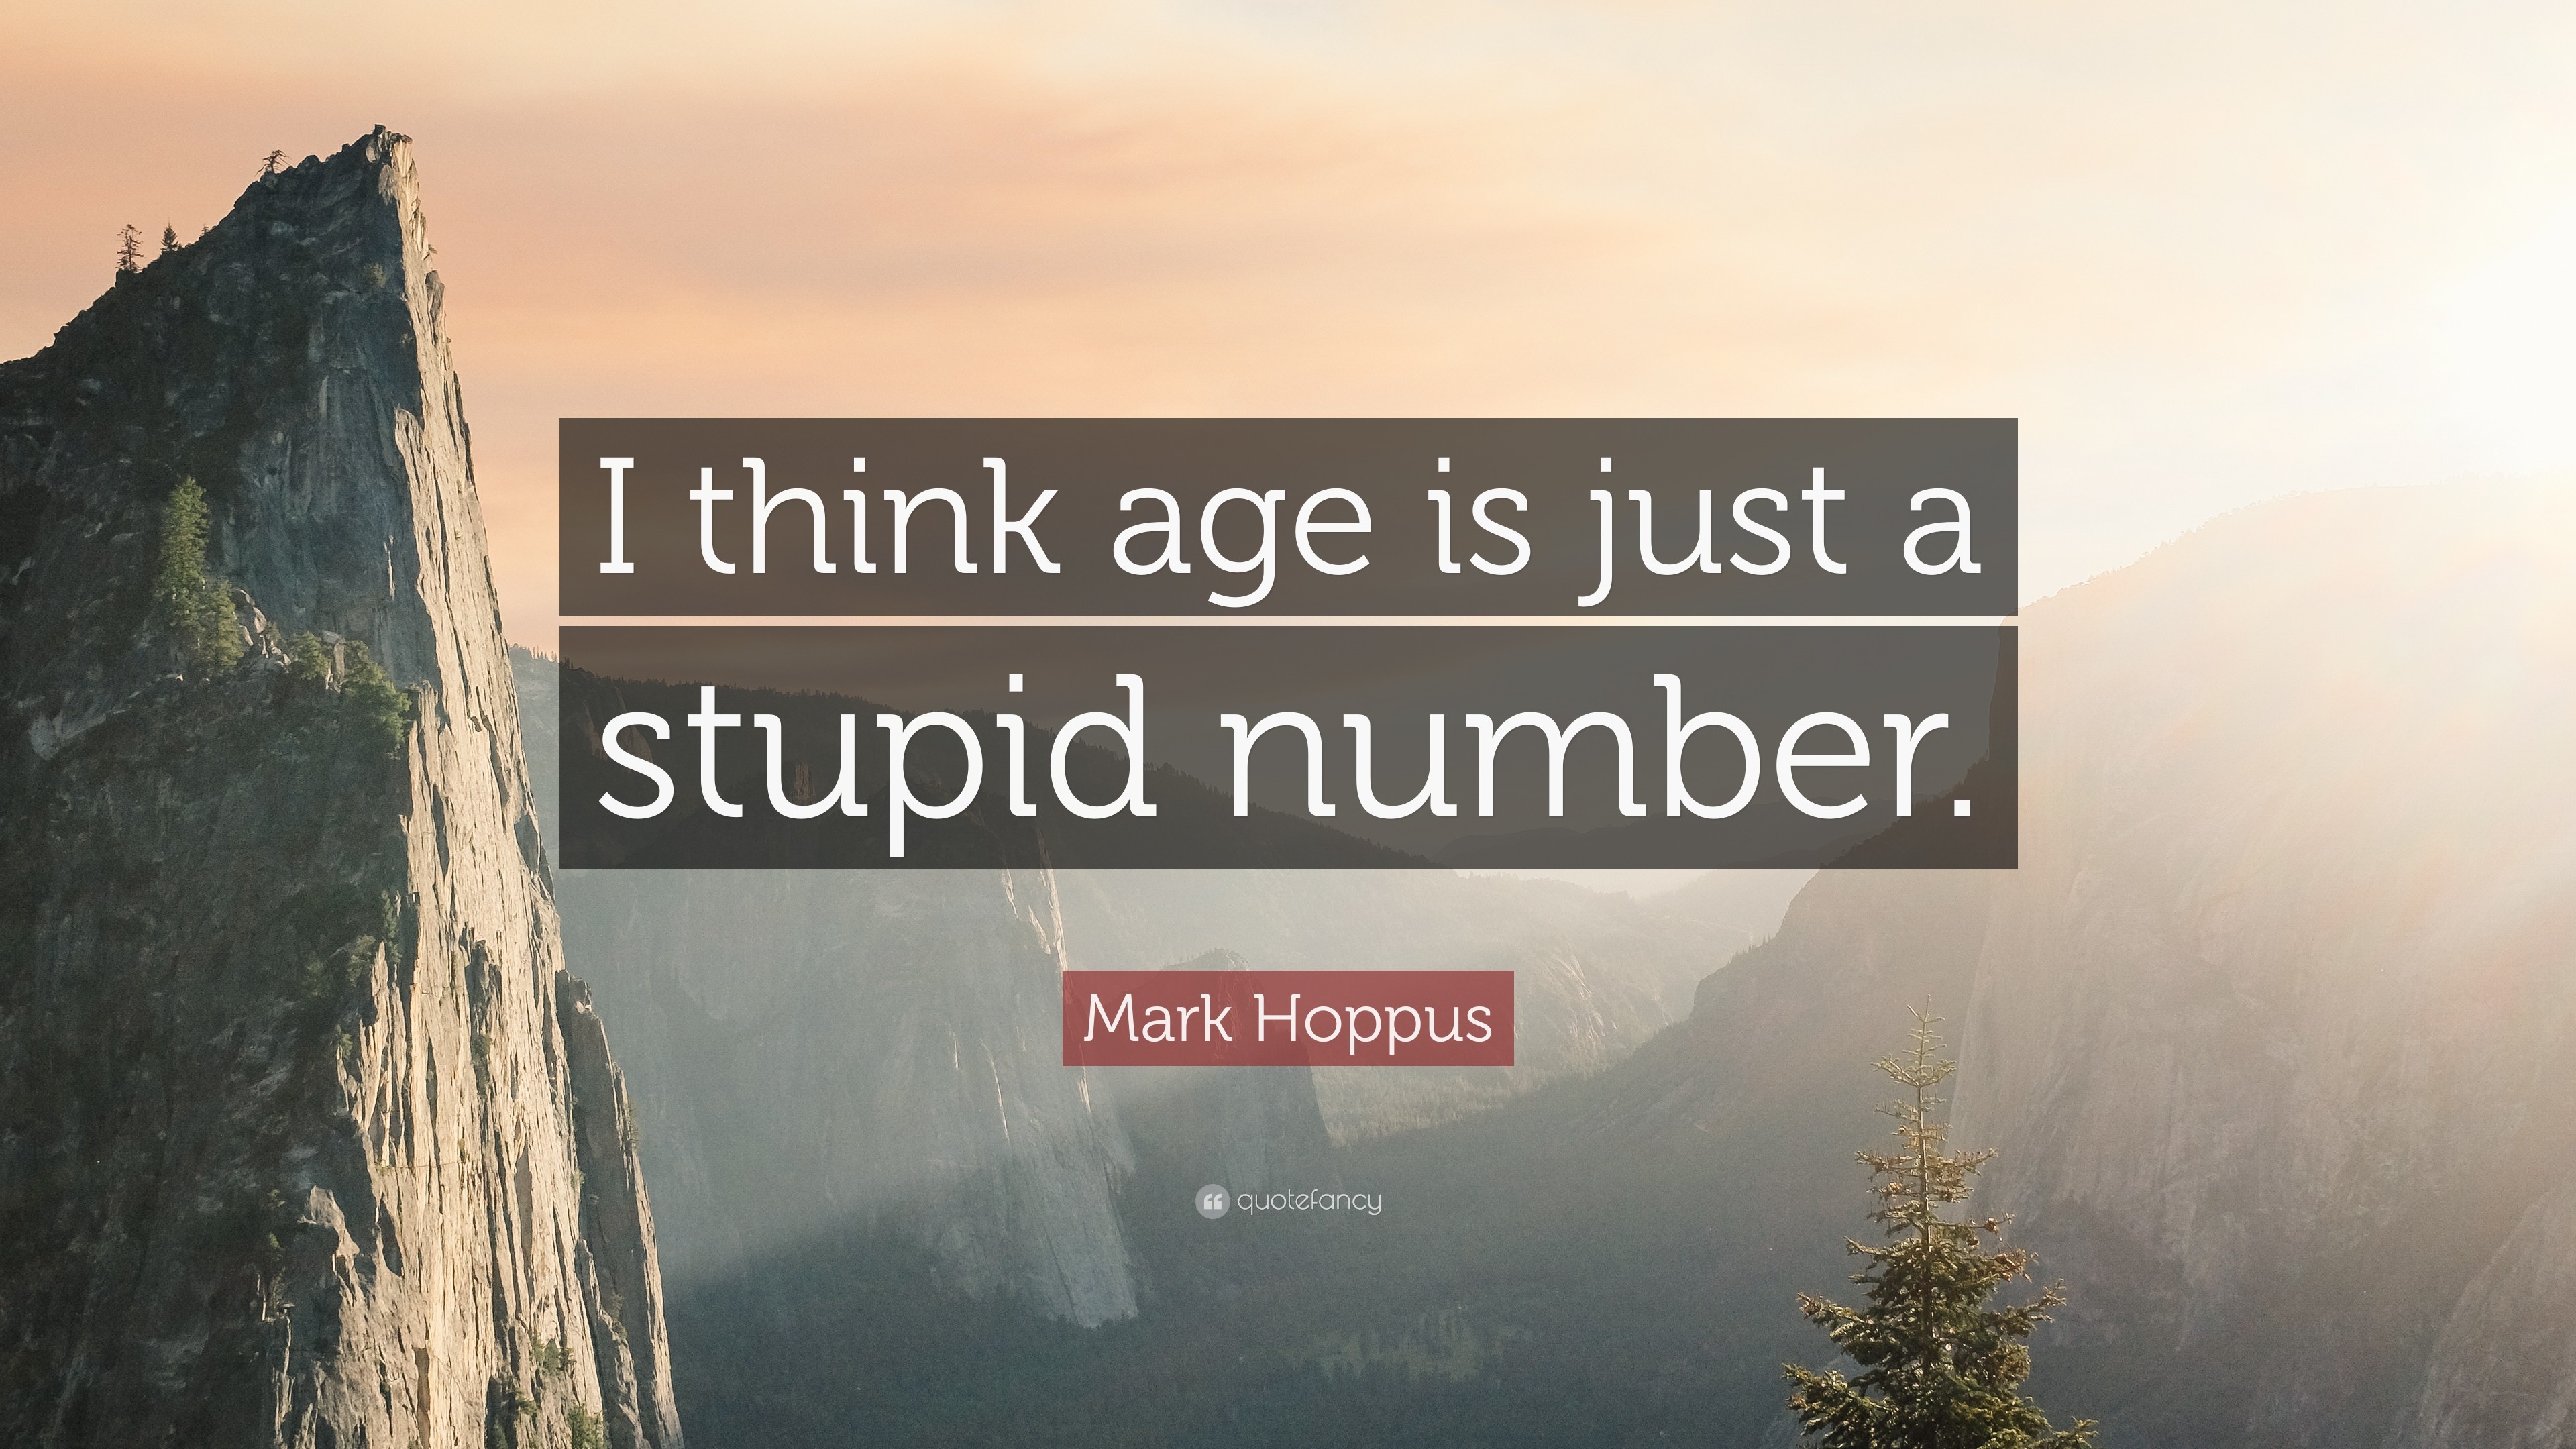 3840x2160 Mark Hoppus Quote: “I think age is just a stupid number.”